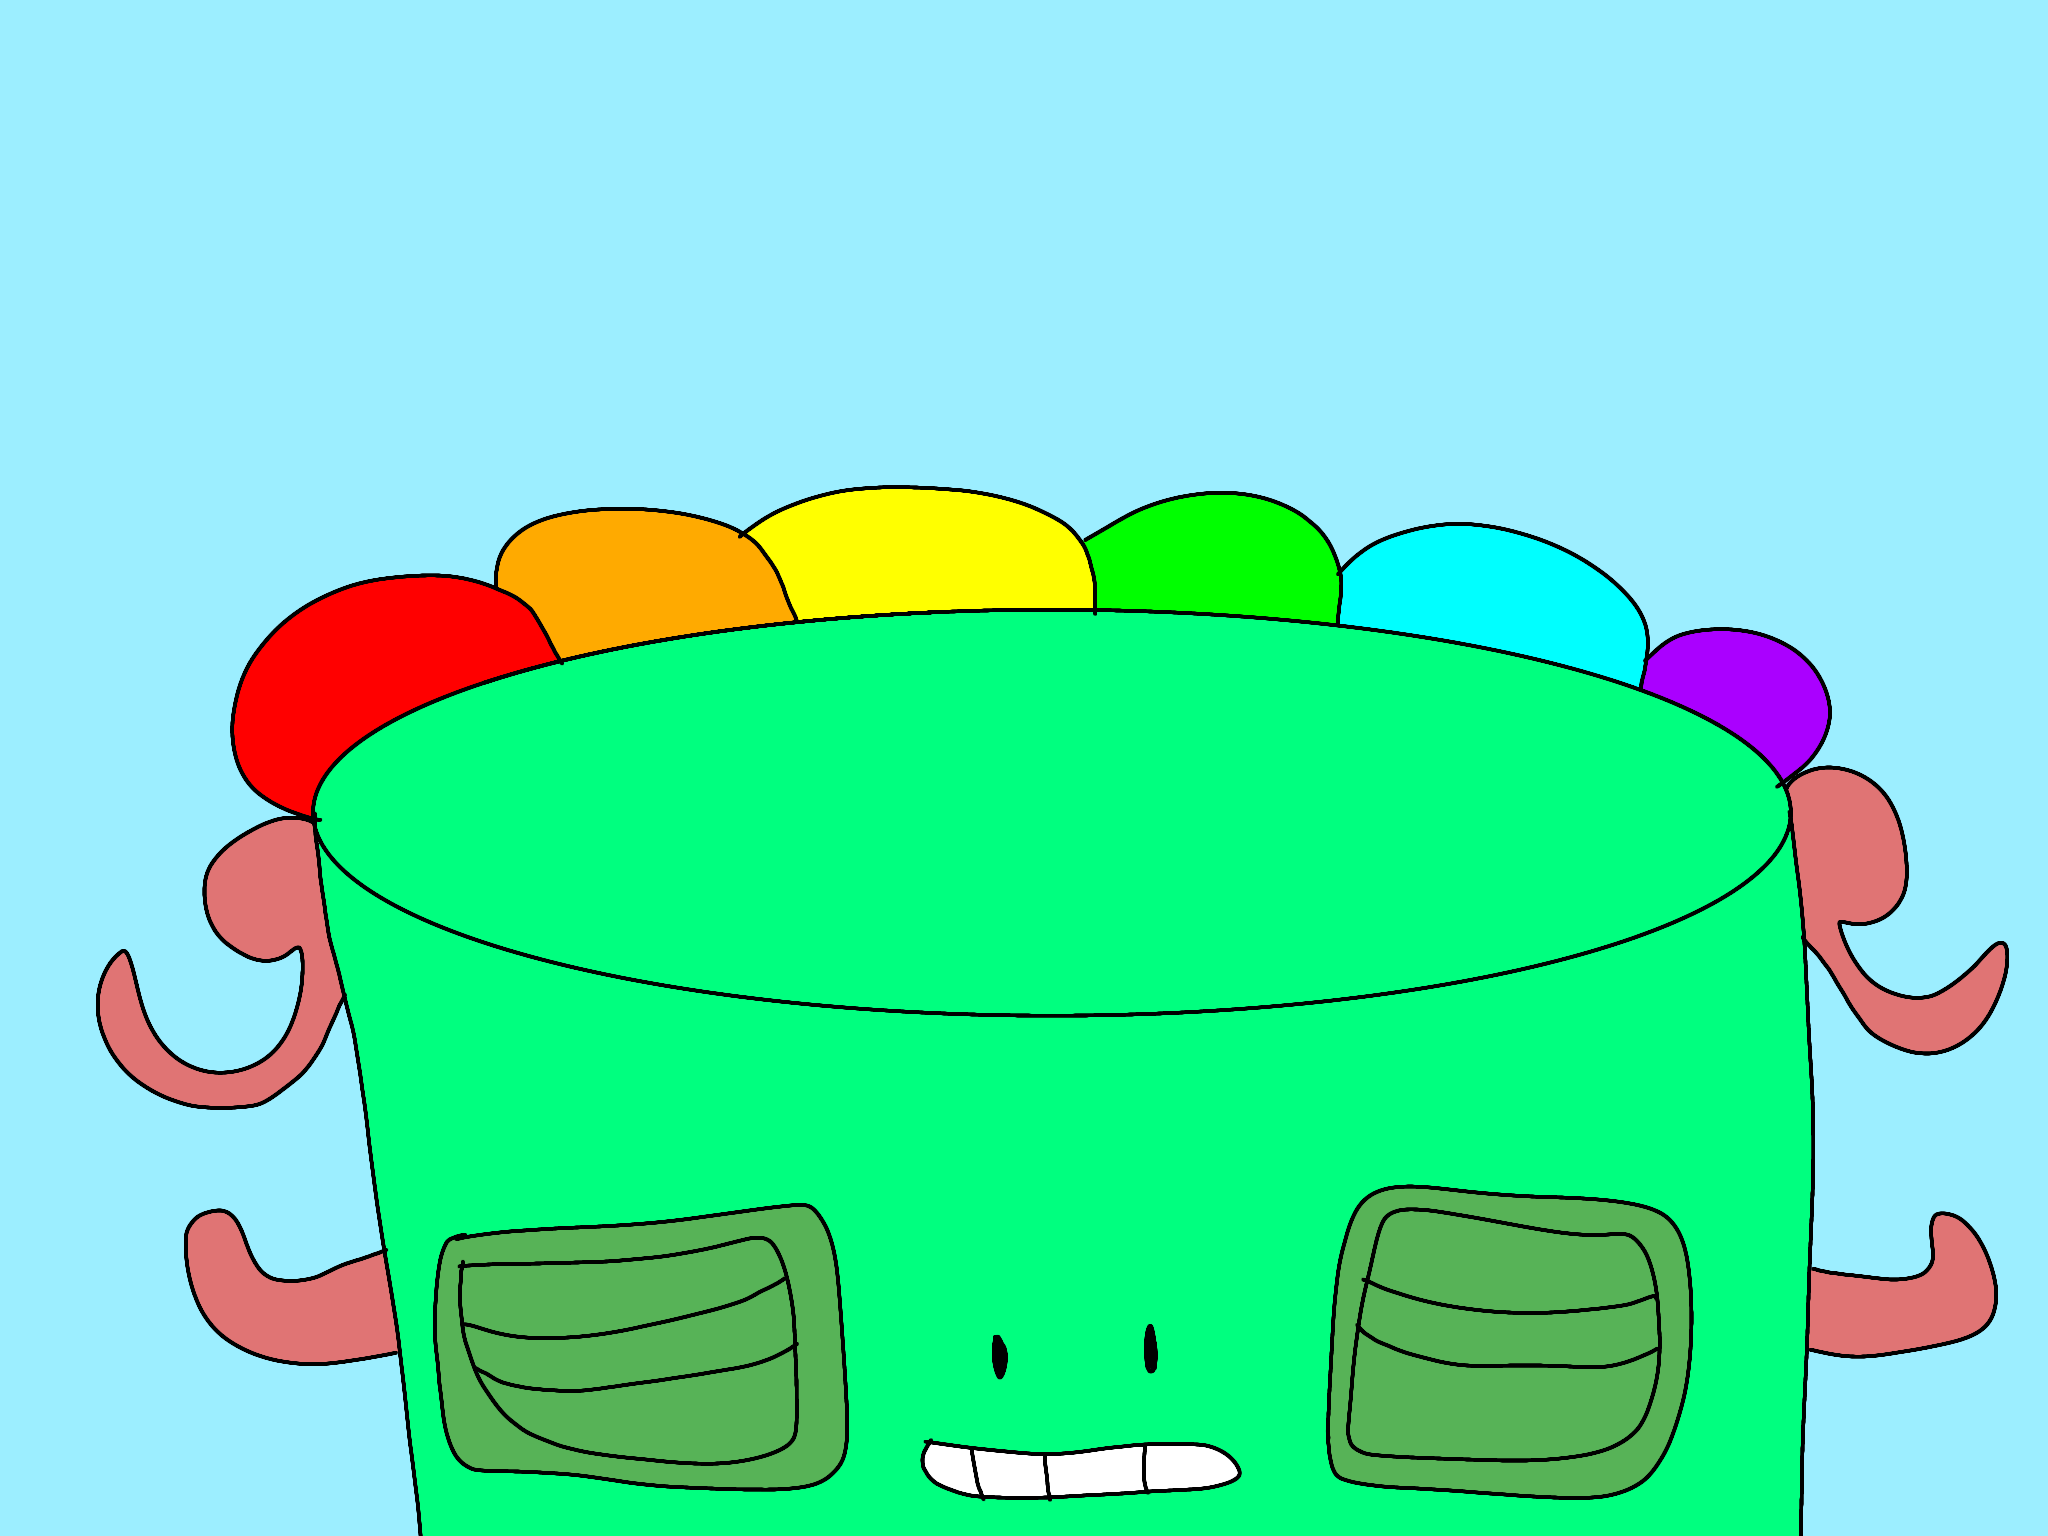 Here is a drawing of the fanmade Water Island Epic Wubbox! : r